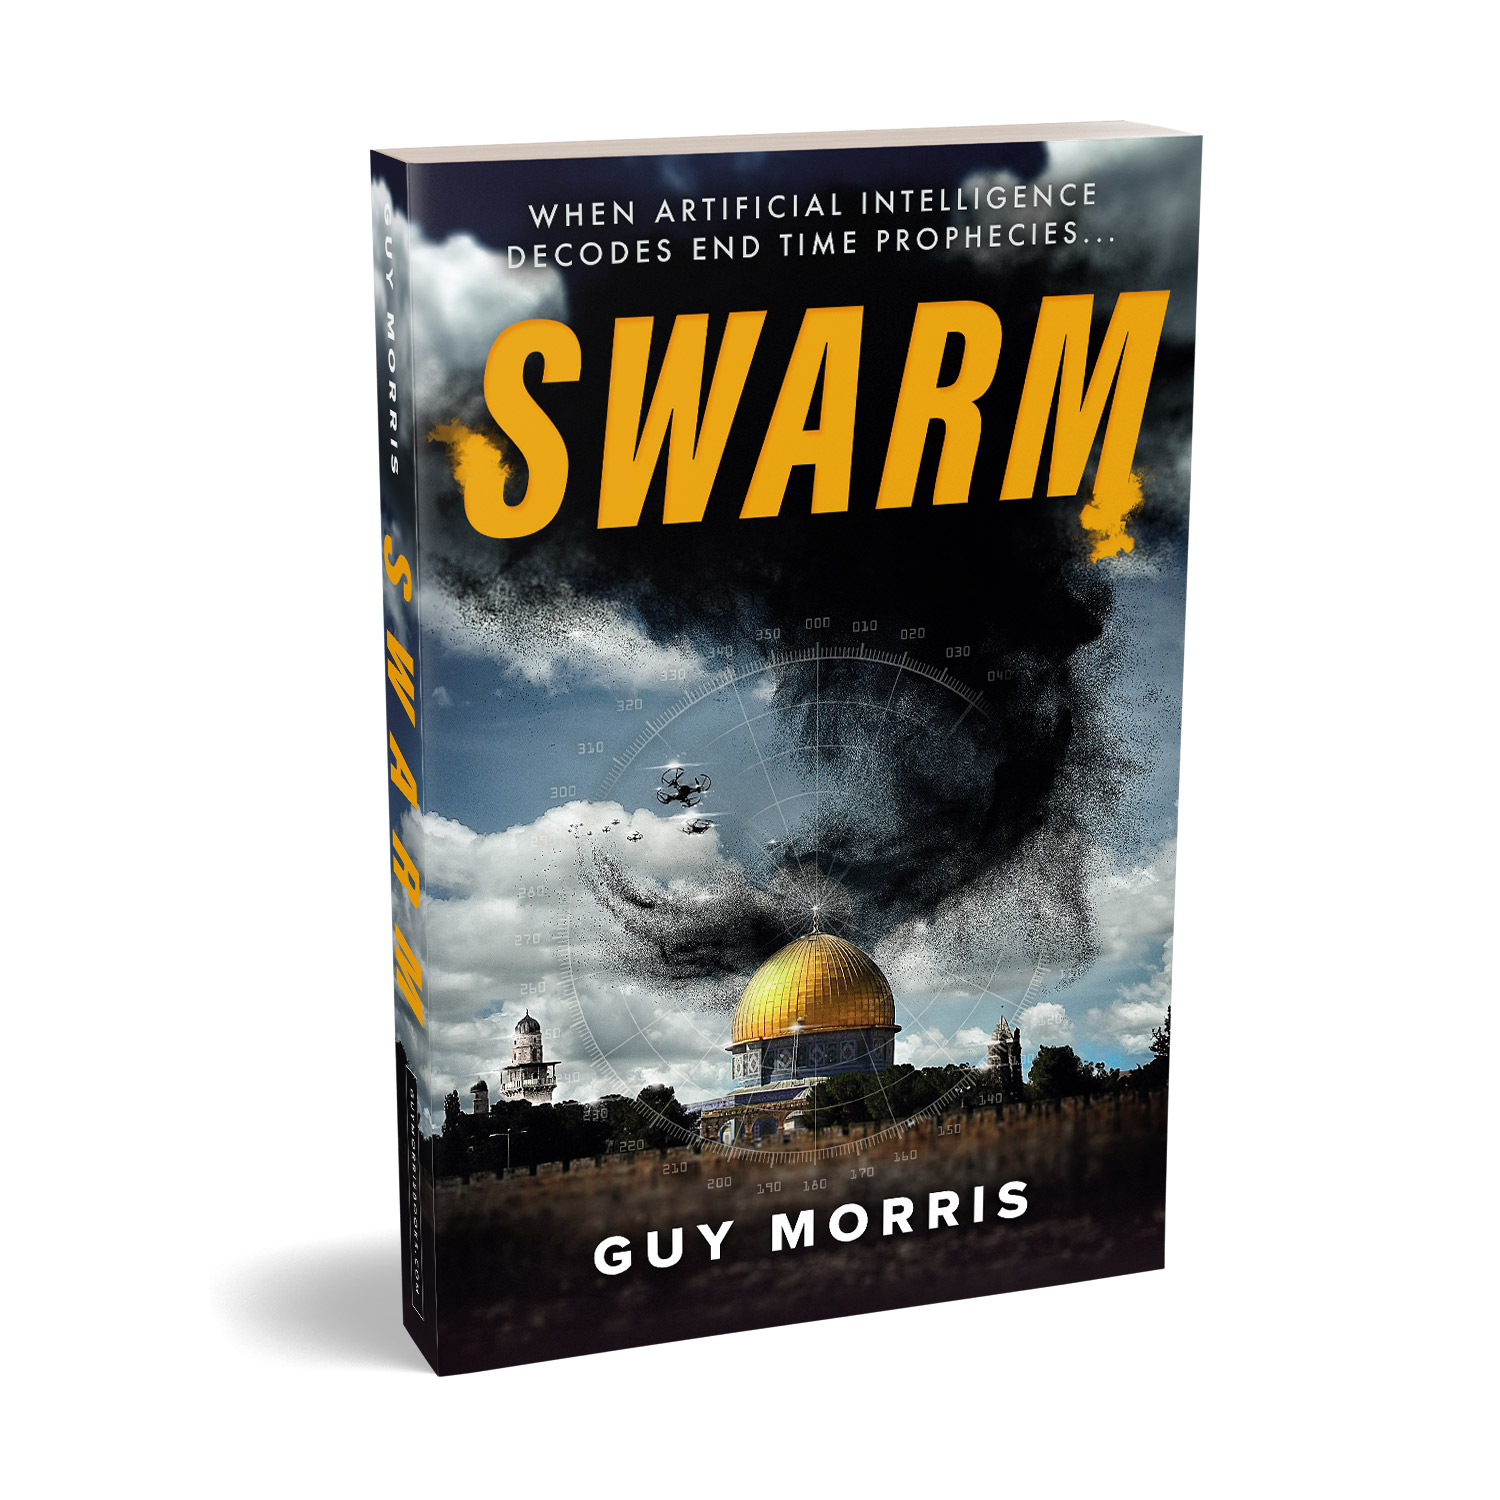 'Swarm' is a globe-spanning, apocalyptic AI tech thriller by author Guy Morris. The book cover and interior design are by Mark Thomas. To learn more about what Mark could do for your book, please visit coverness.com.